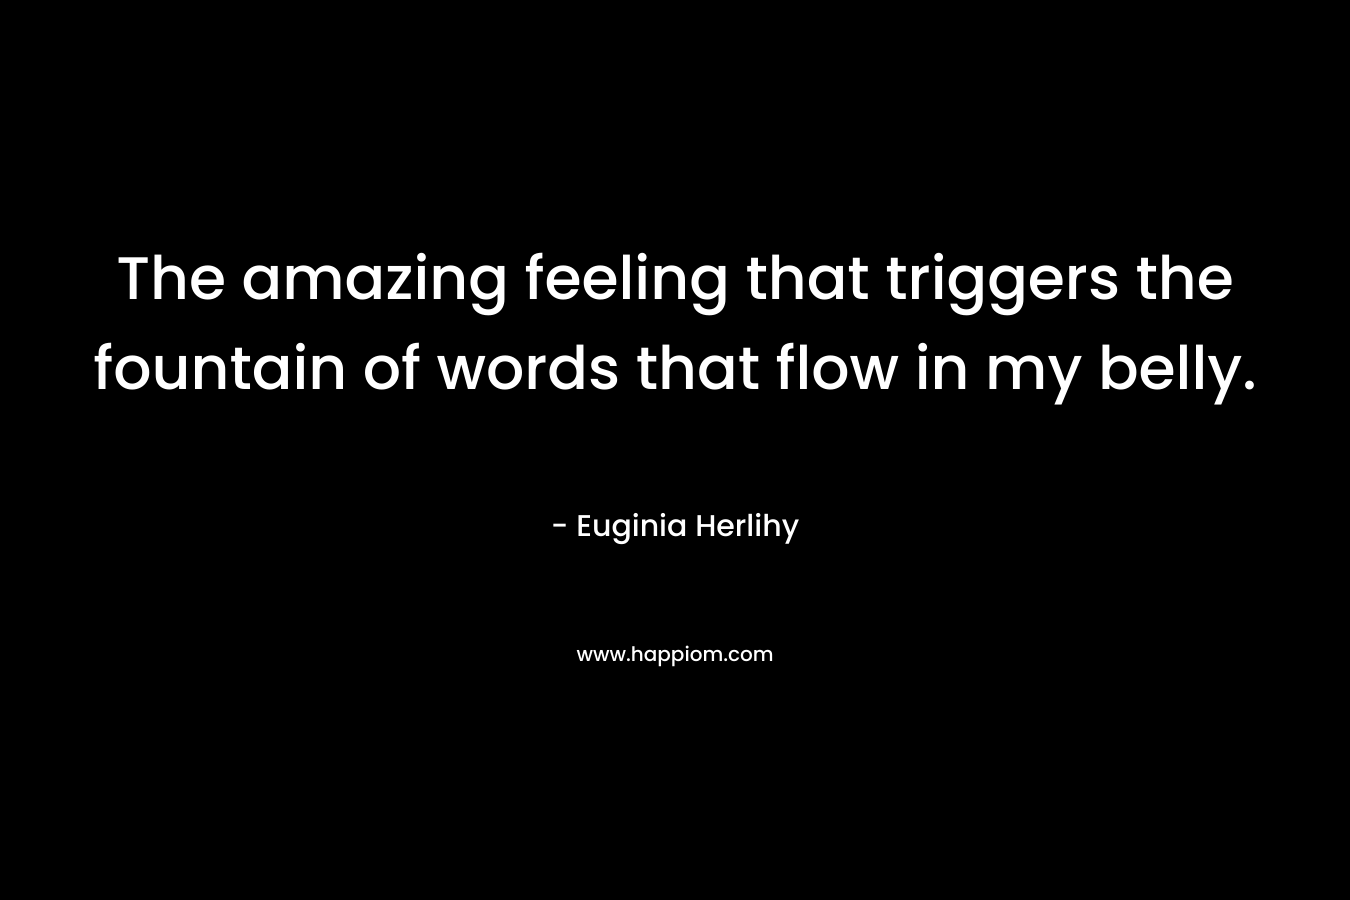 The amazing feeling that triggers the fountain of words that flow in my belly.